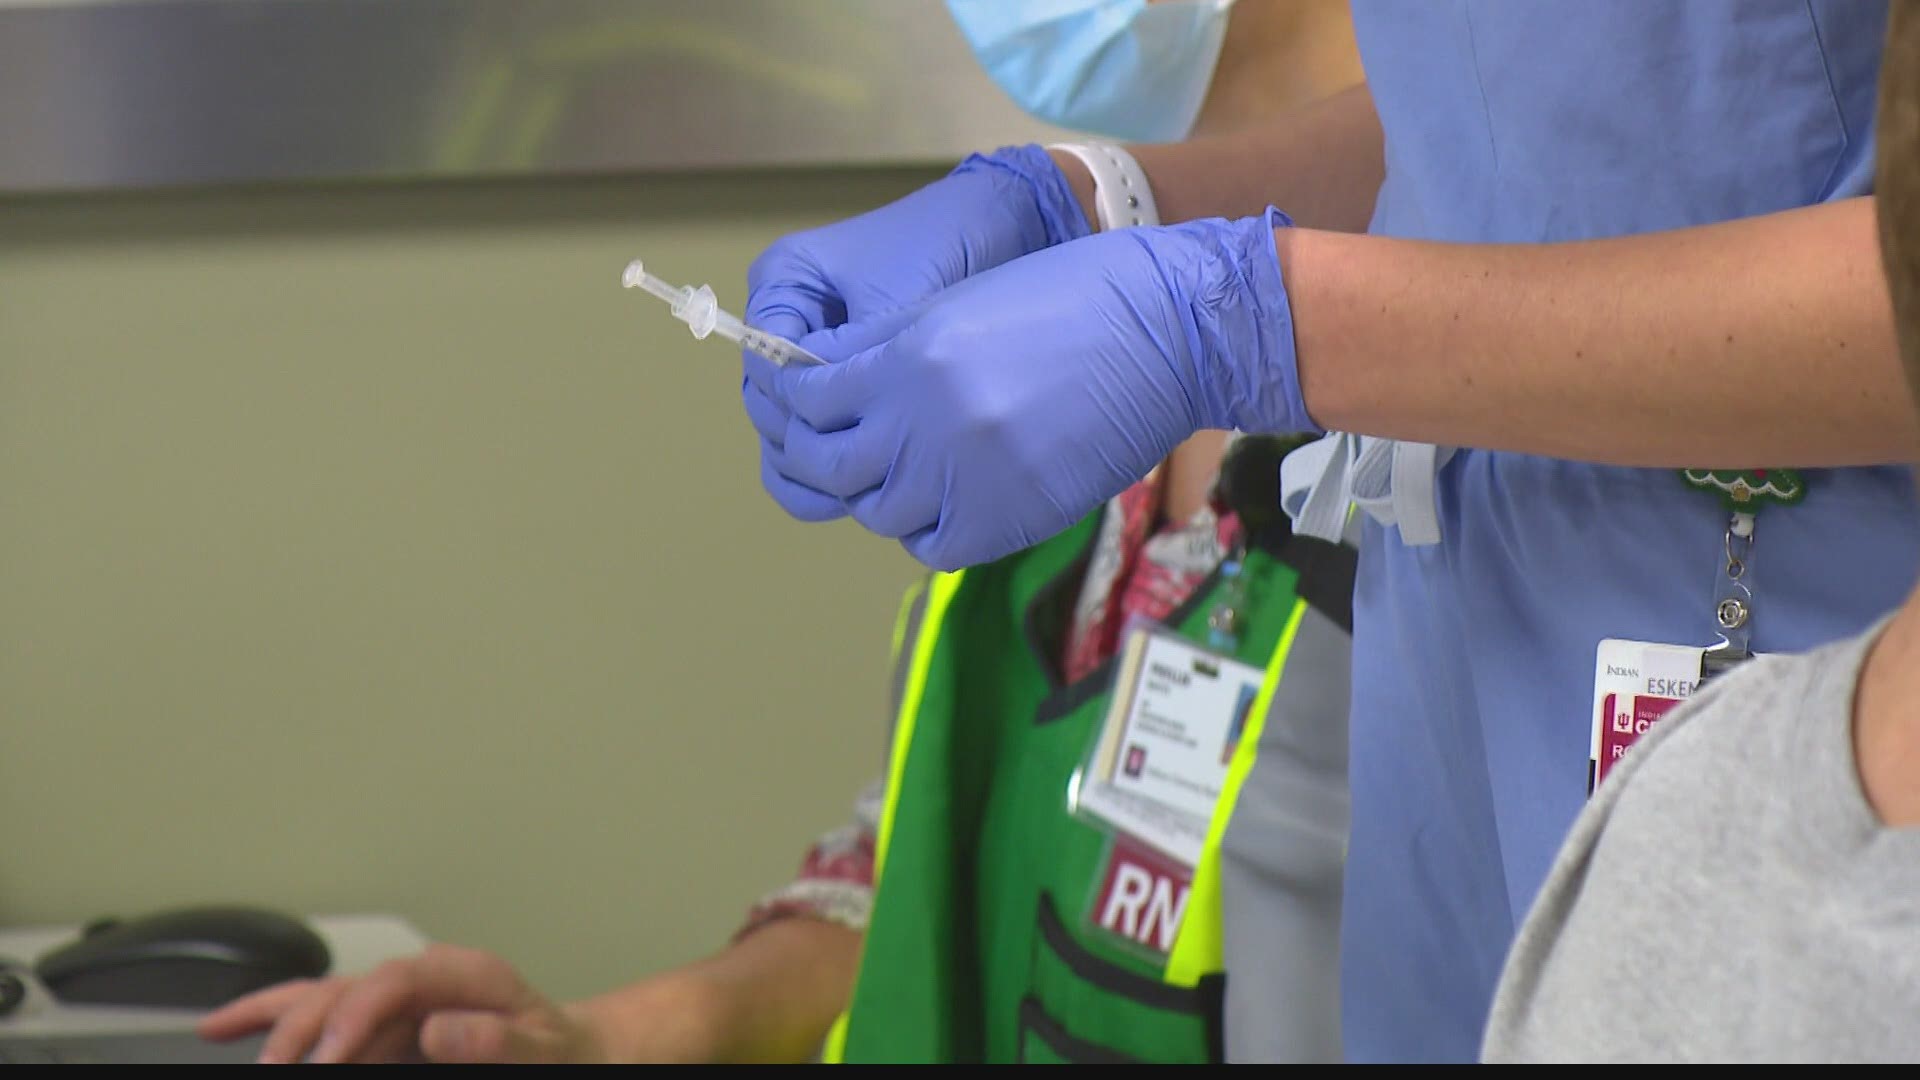 Indiana hospitals are struggling to know how many employees have received COVID-19 vaccinations.